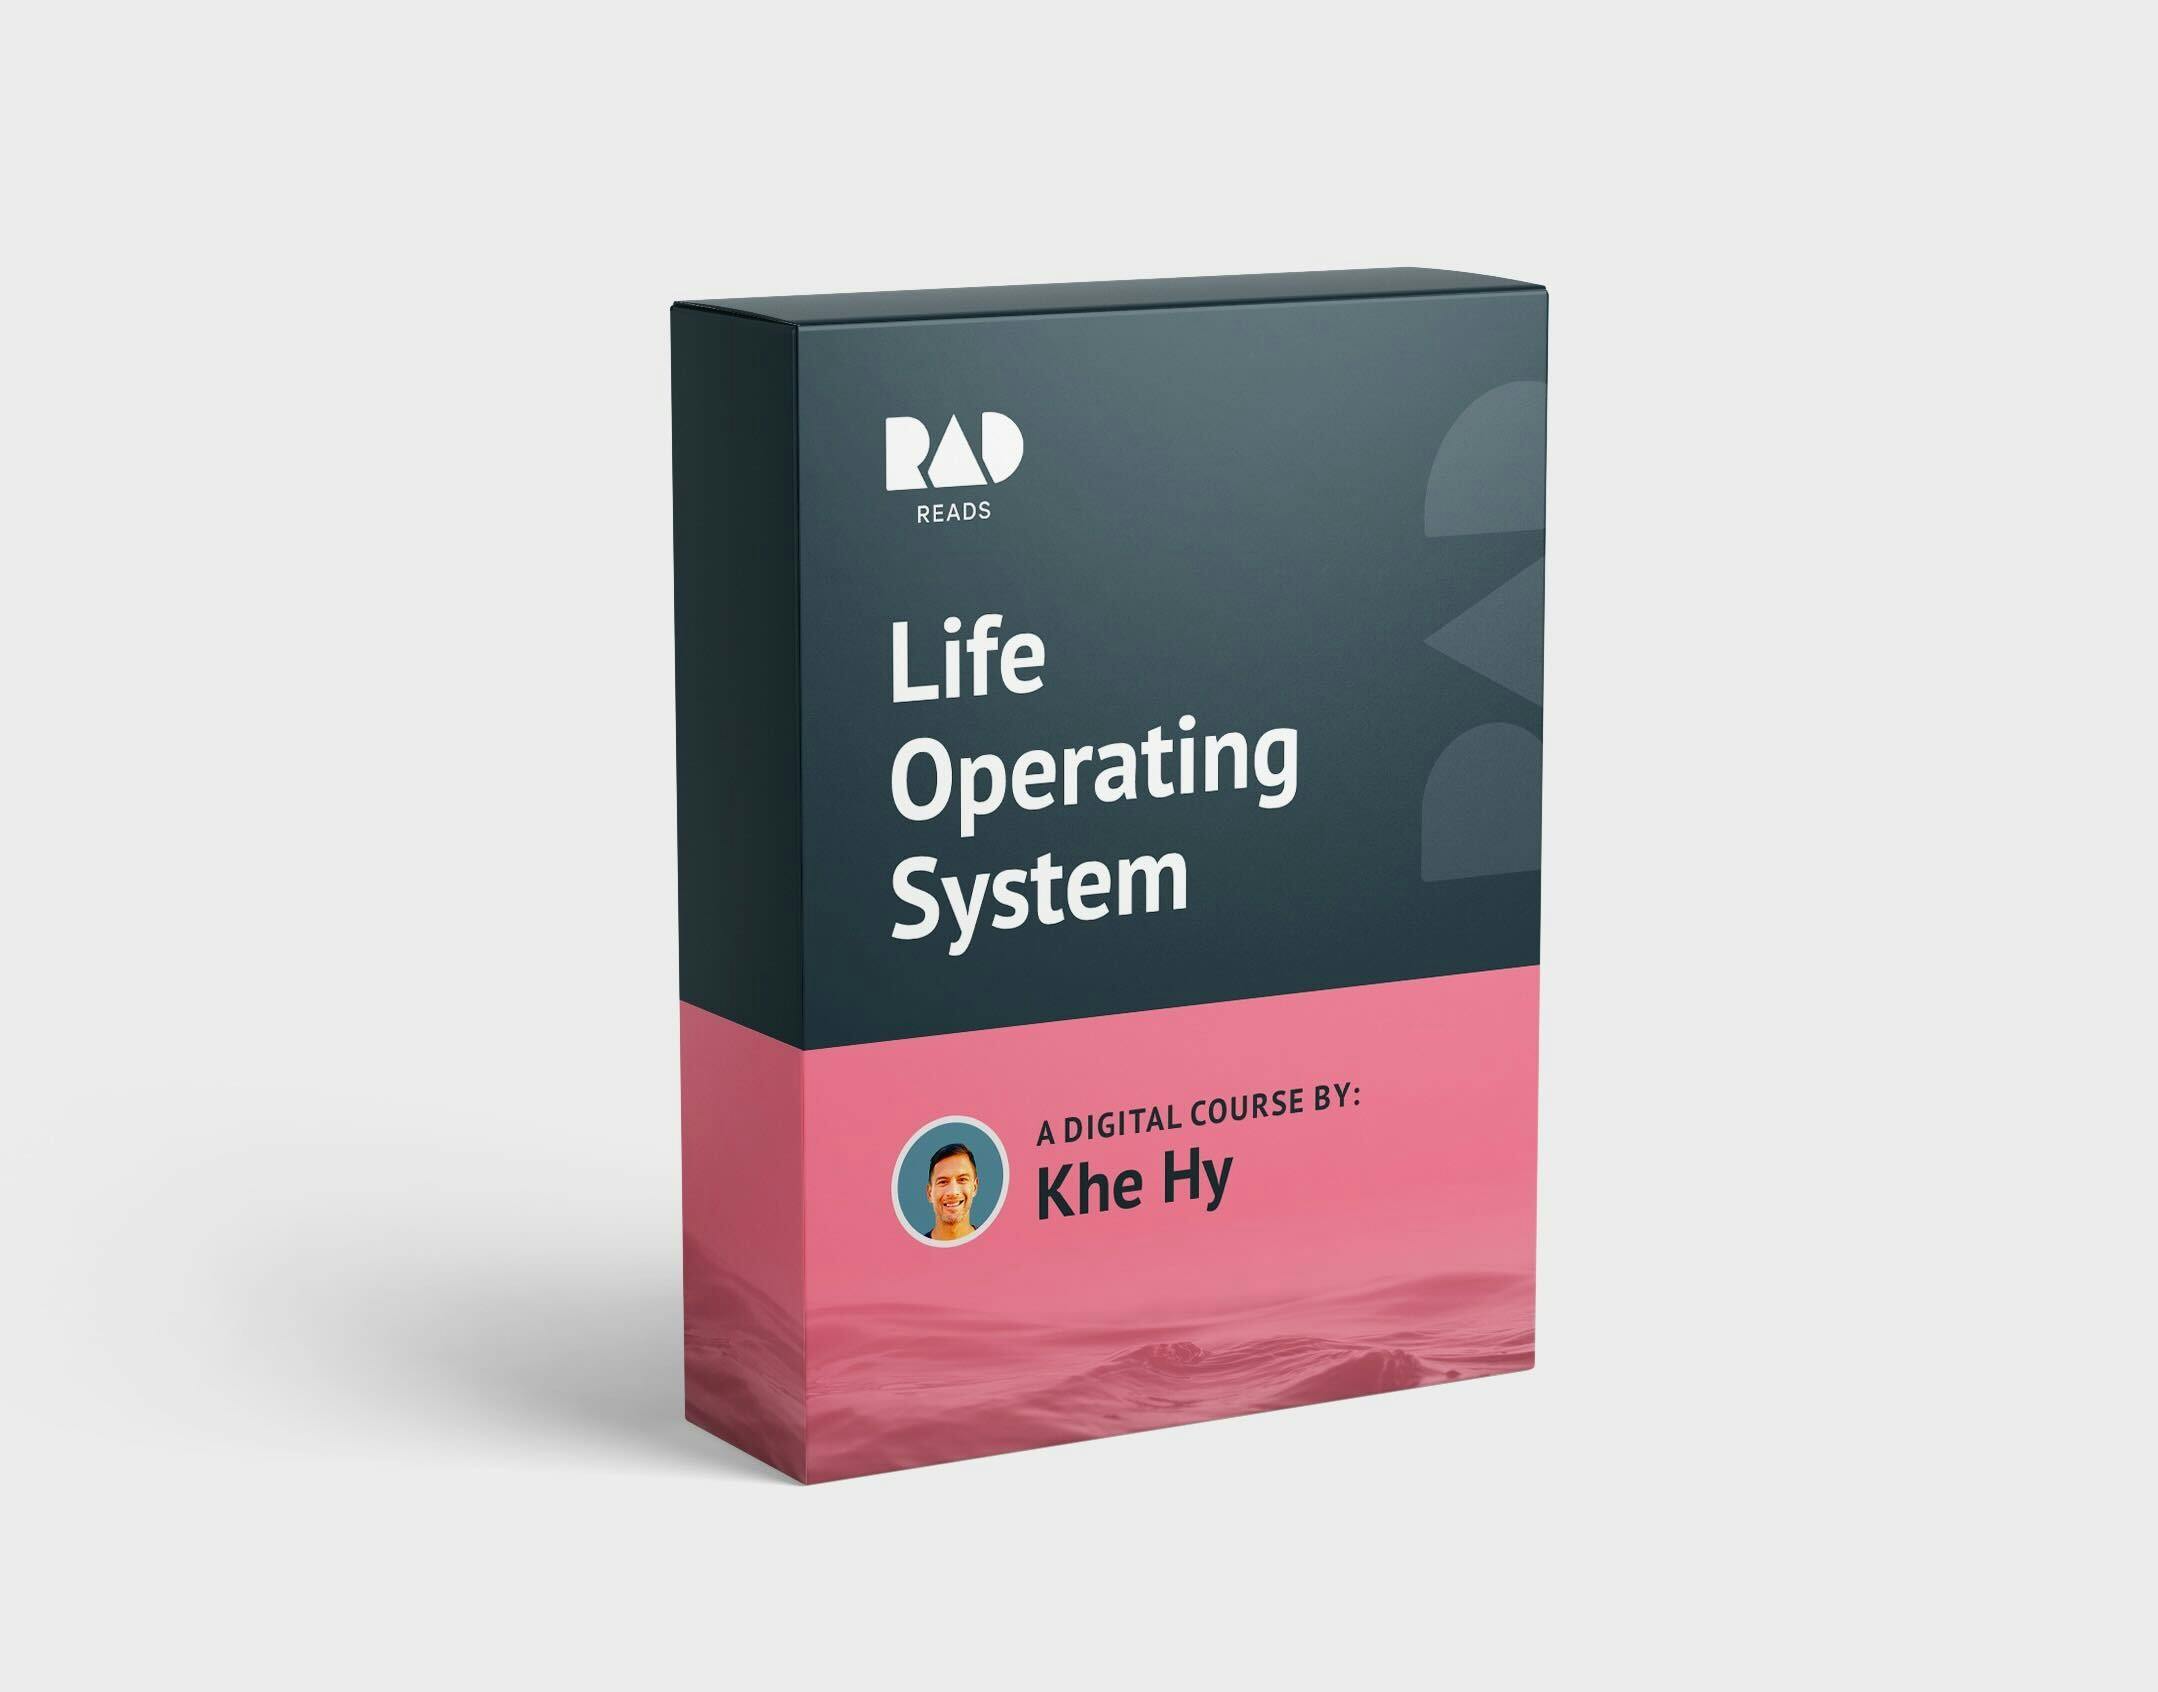 RadReads' Life Operating System - A Digital Course by Khe Hy